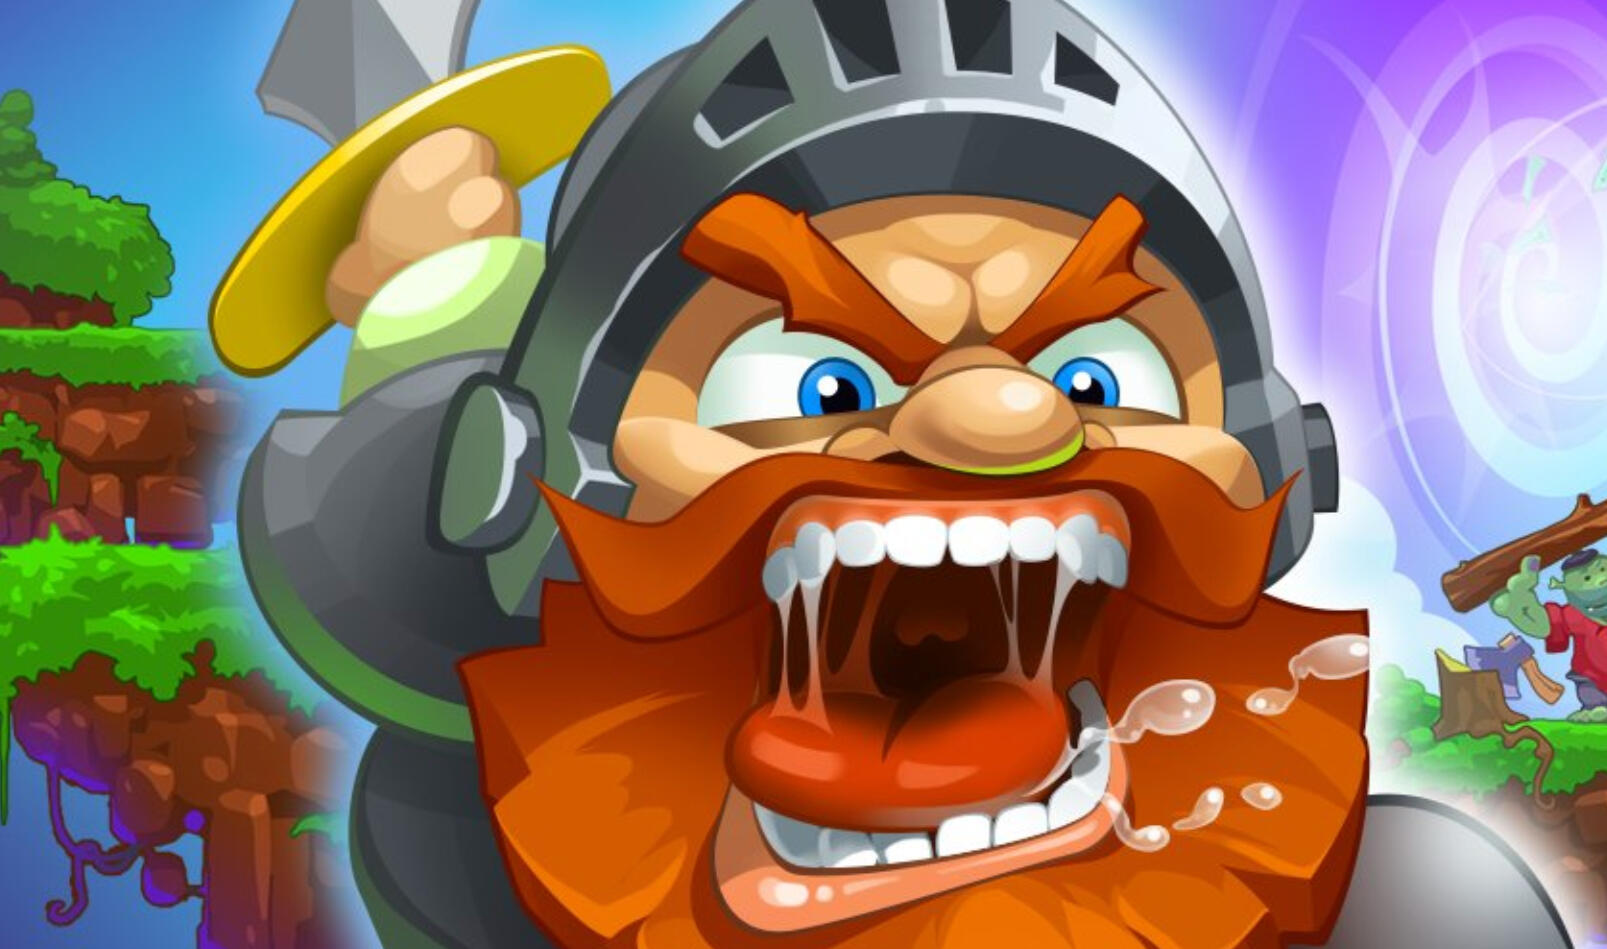 A game animated character, used in NFT game marketing, with a red beard and mustache in armor and a helmet with a sword